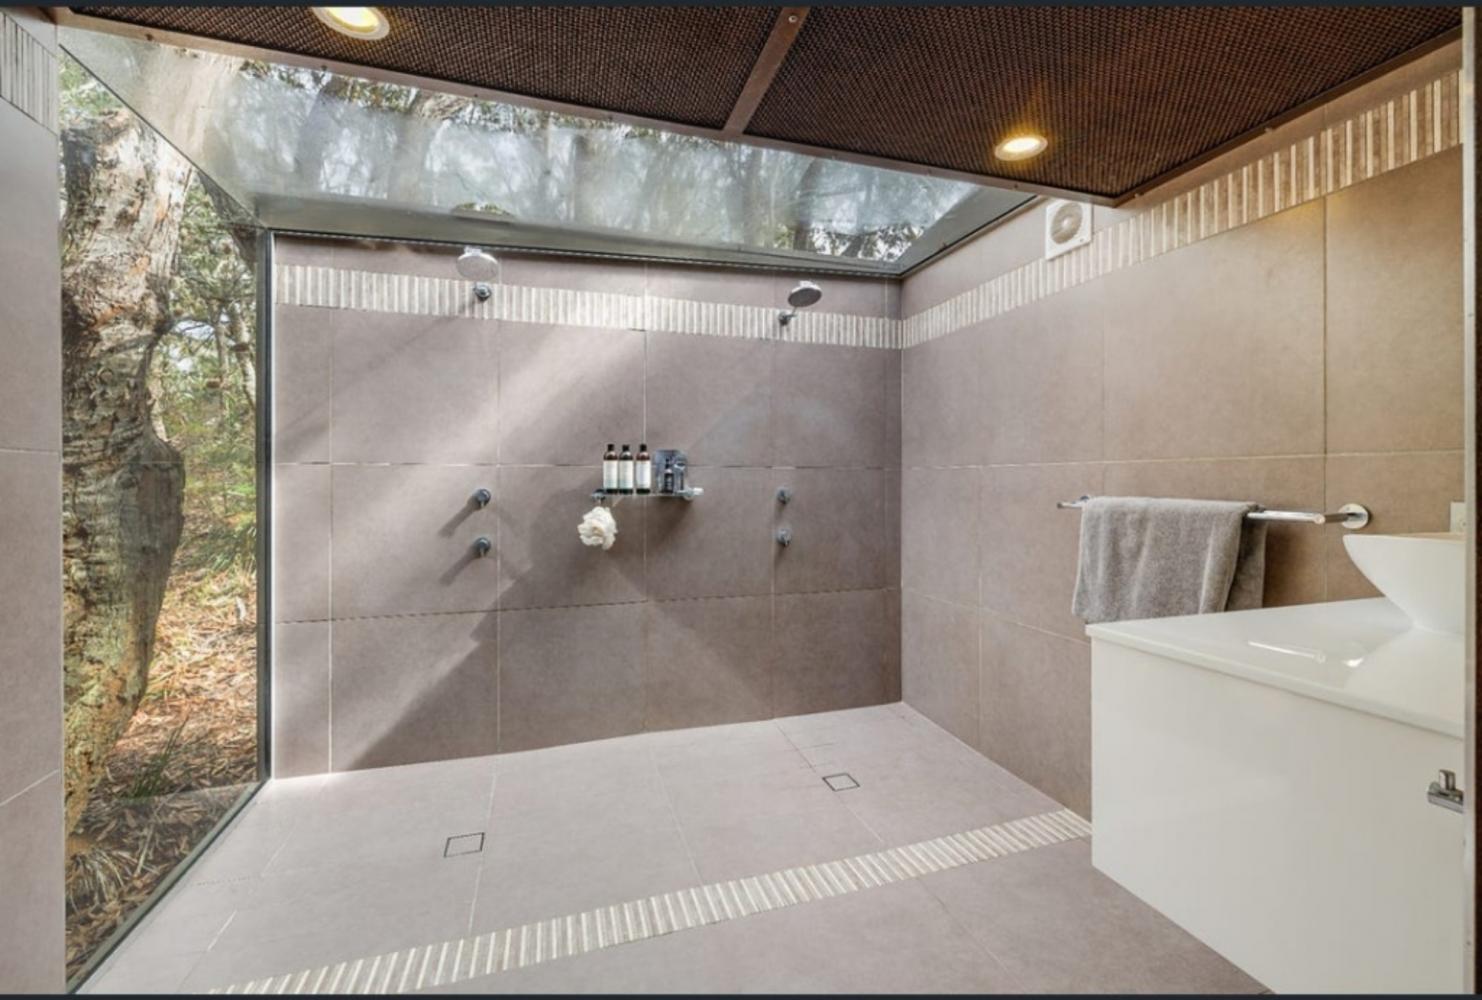 master bedroom ensuite with shower toilet and vanity. glass wall and roof to view the surrounding forest